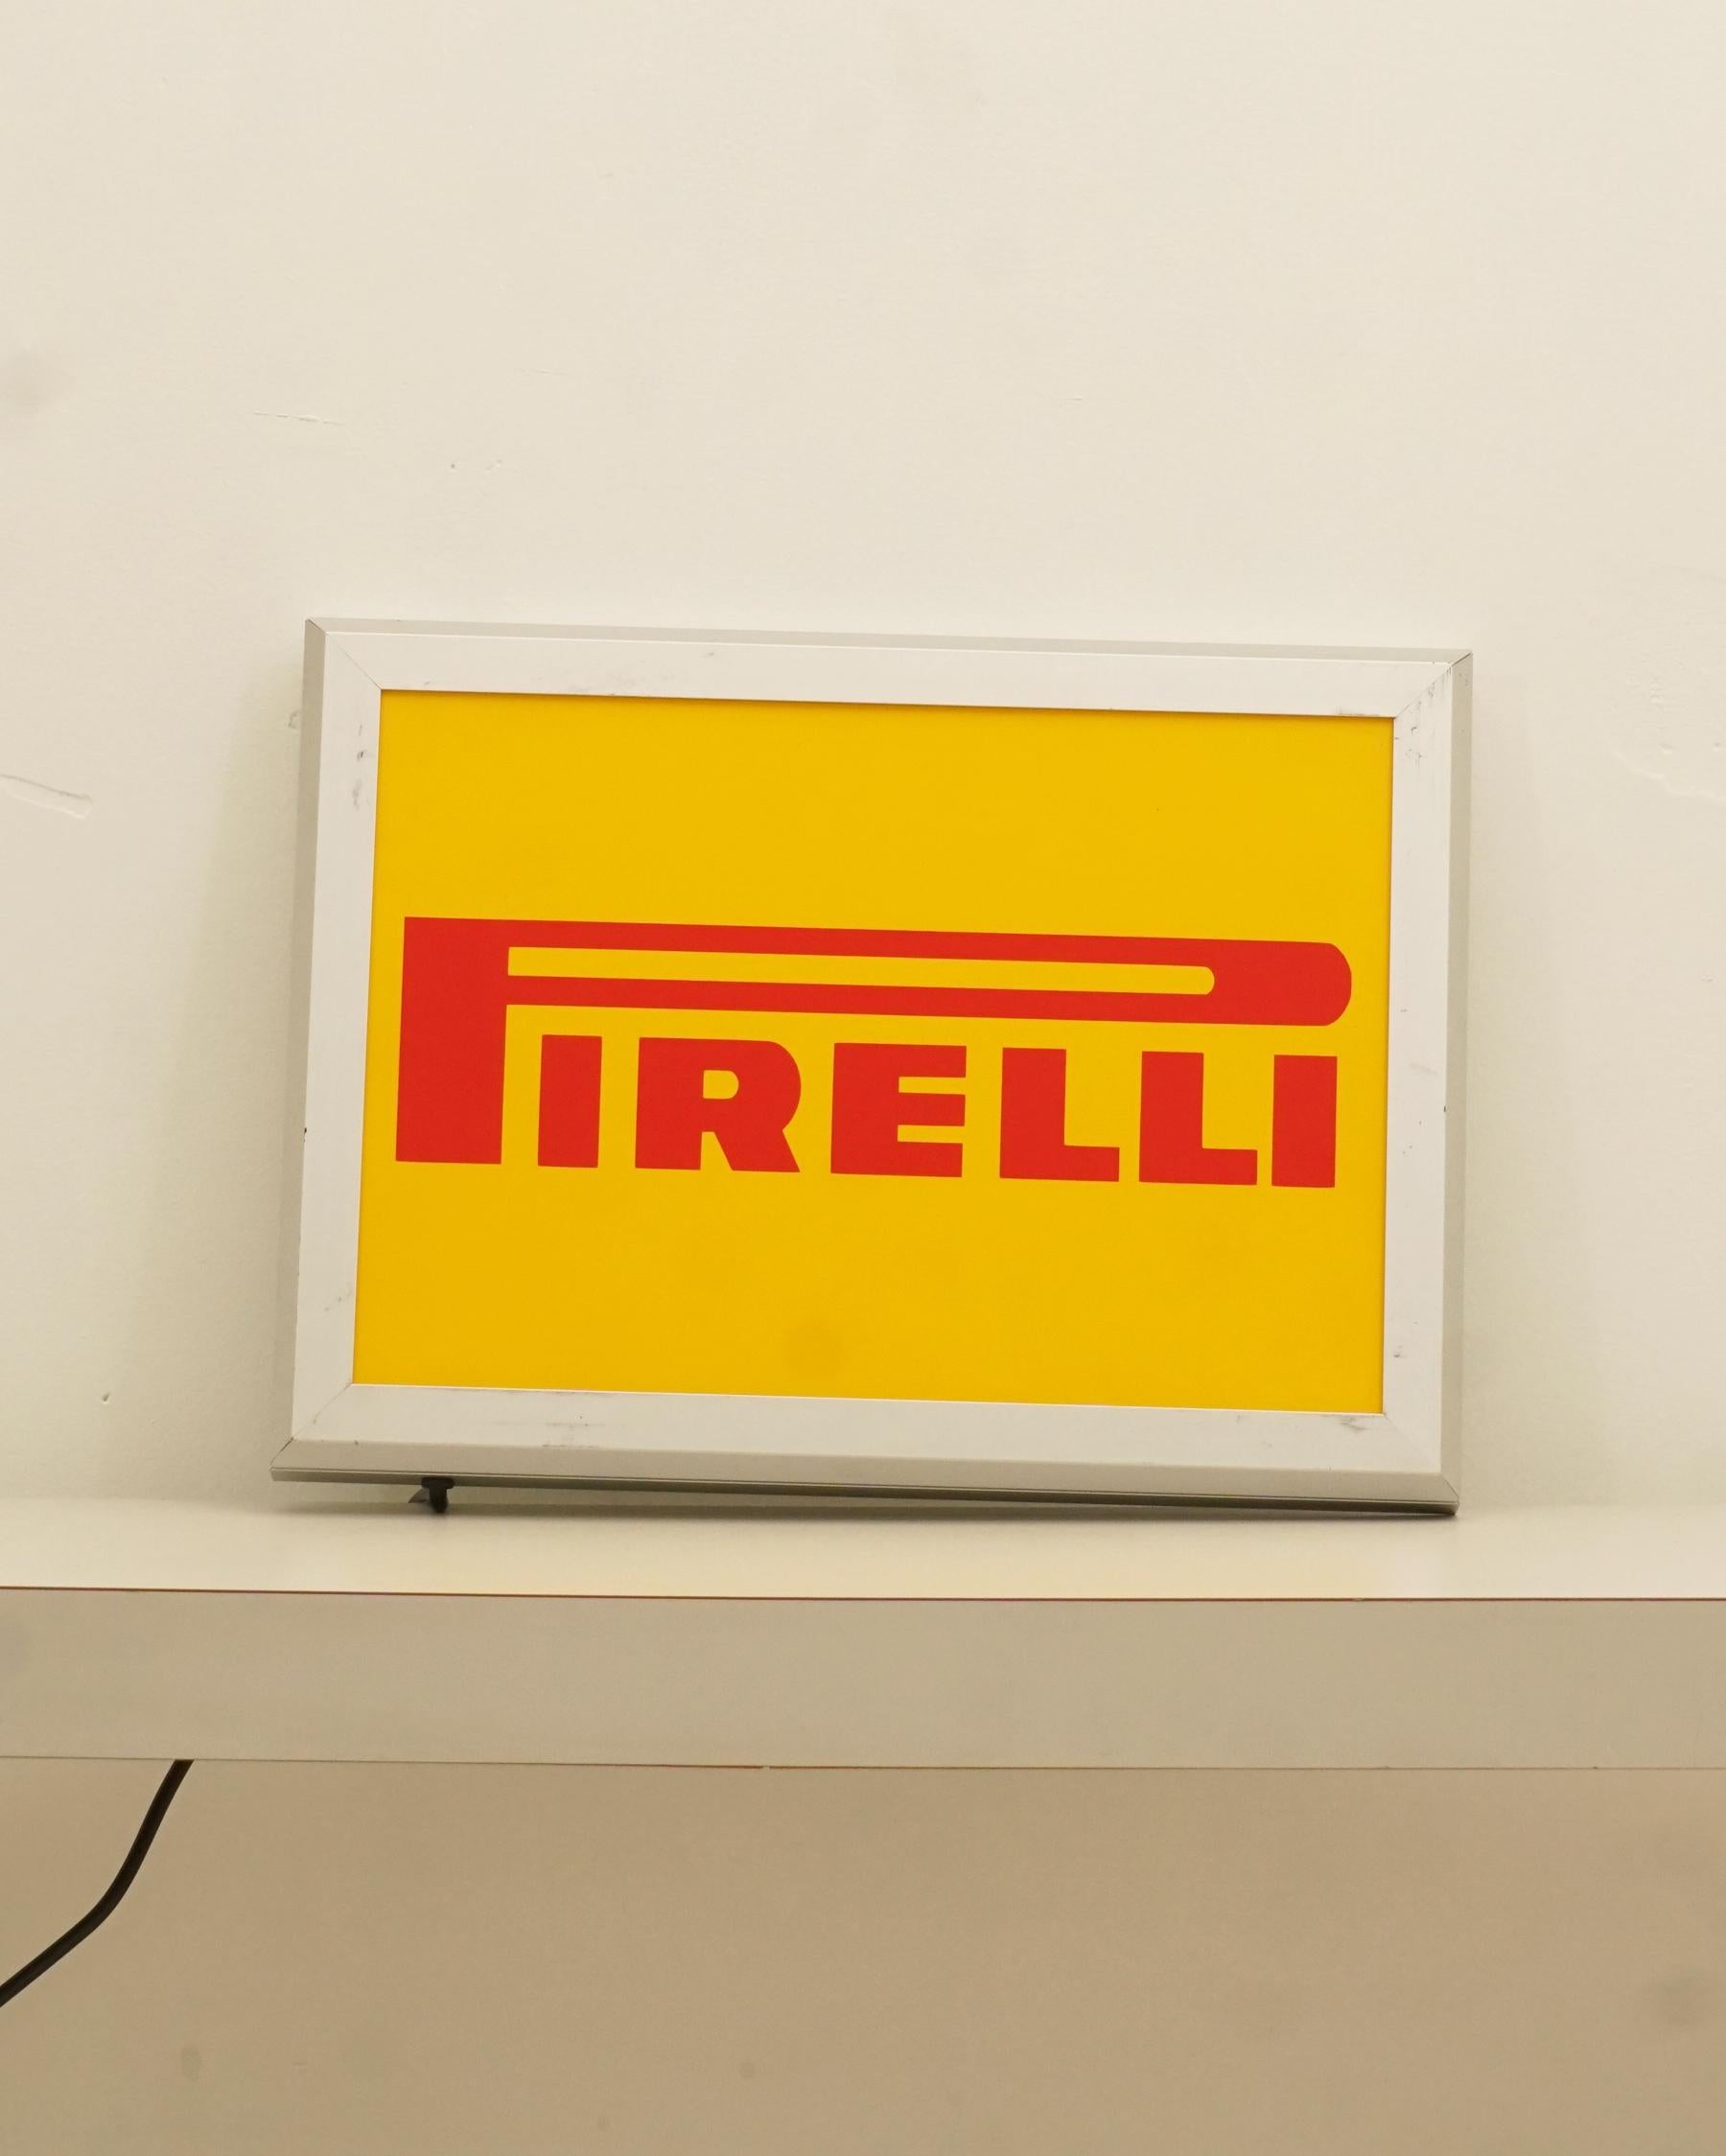 1990s Pirelli Tires advertising sign. Sign made of steel and plexiglass, with the Pirelli logo and a protective plate. Made in the Netherlands. In near new condition. Has been retrofitted with LED lights and a North American plug. All original parts